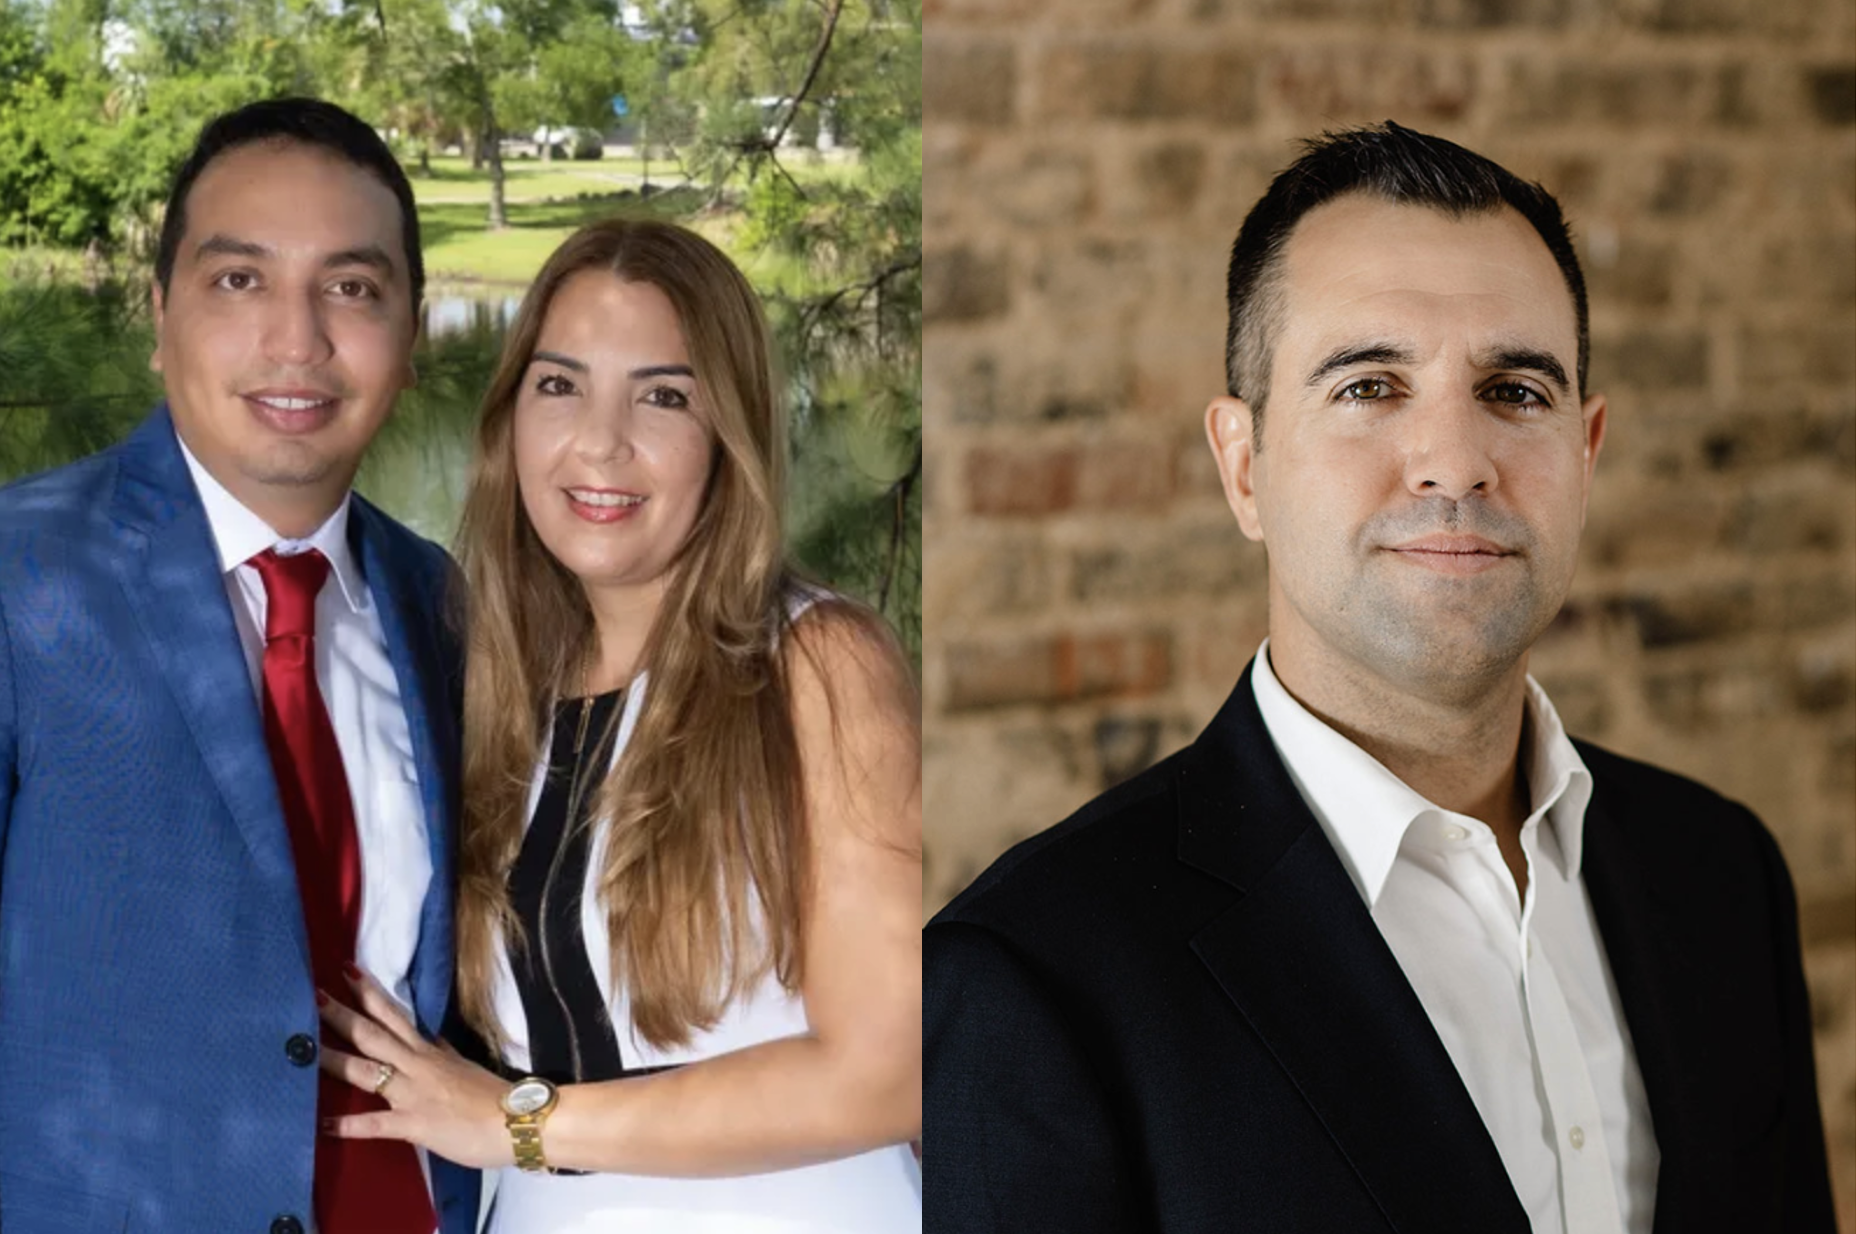 FL-118 GOP Candidate Daniel Sotelo Faces Attacks From Incumbent And State House GOP Campaign Committee